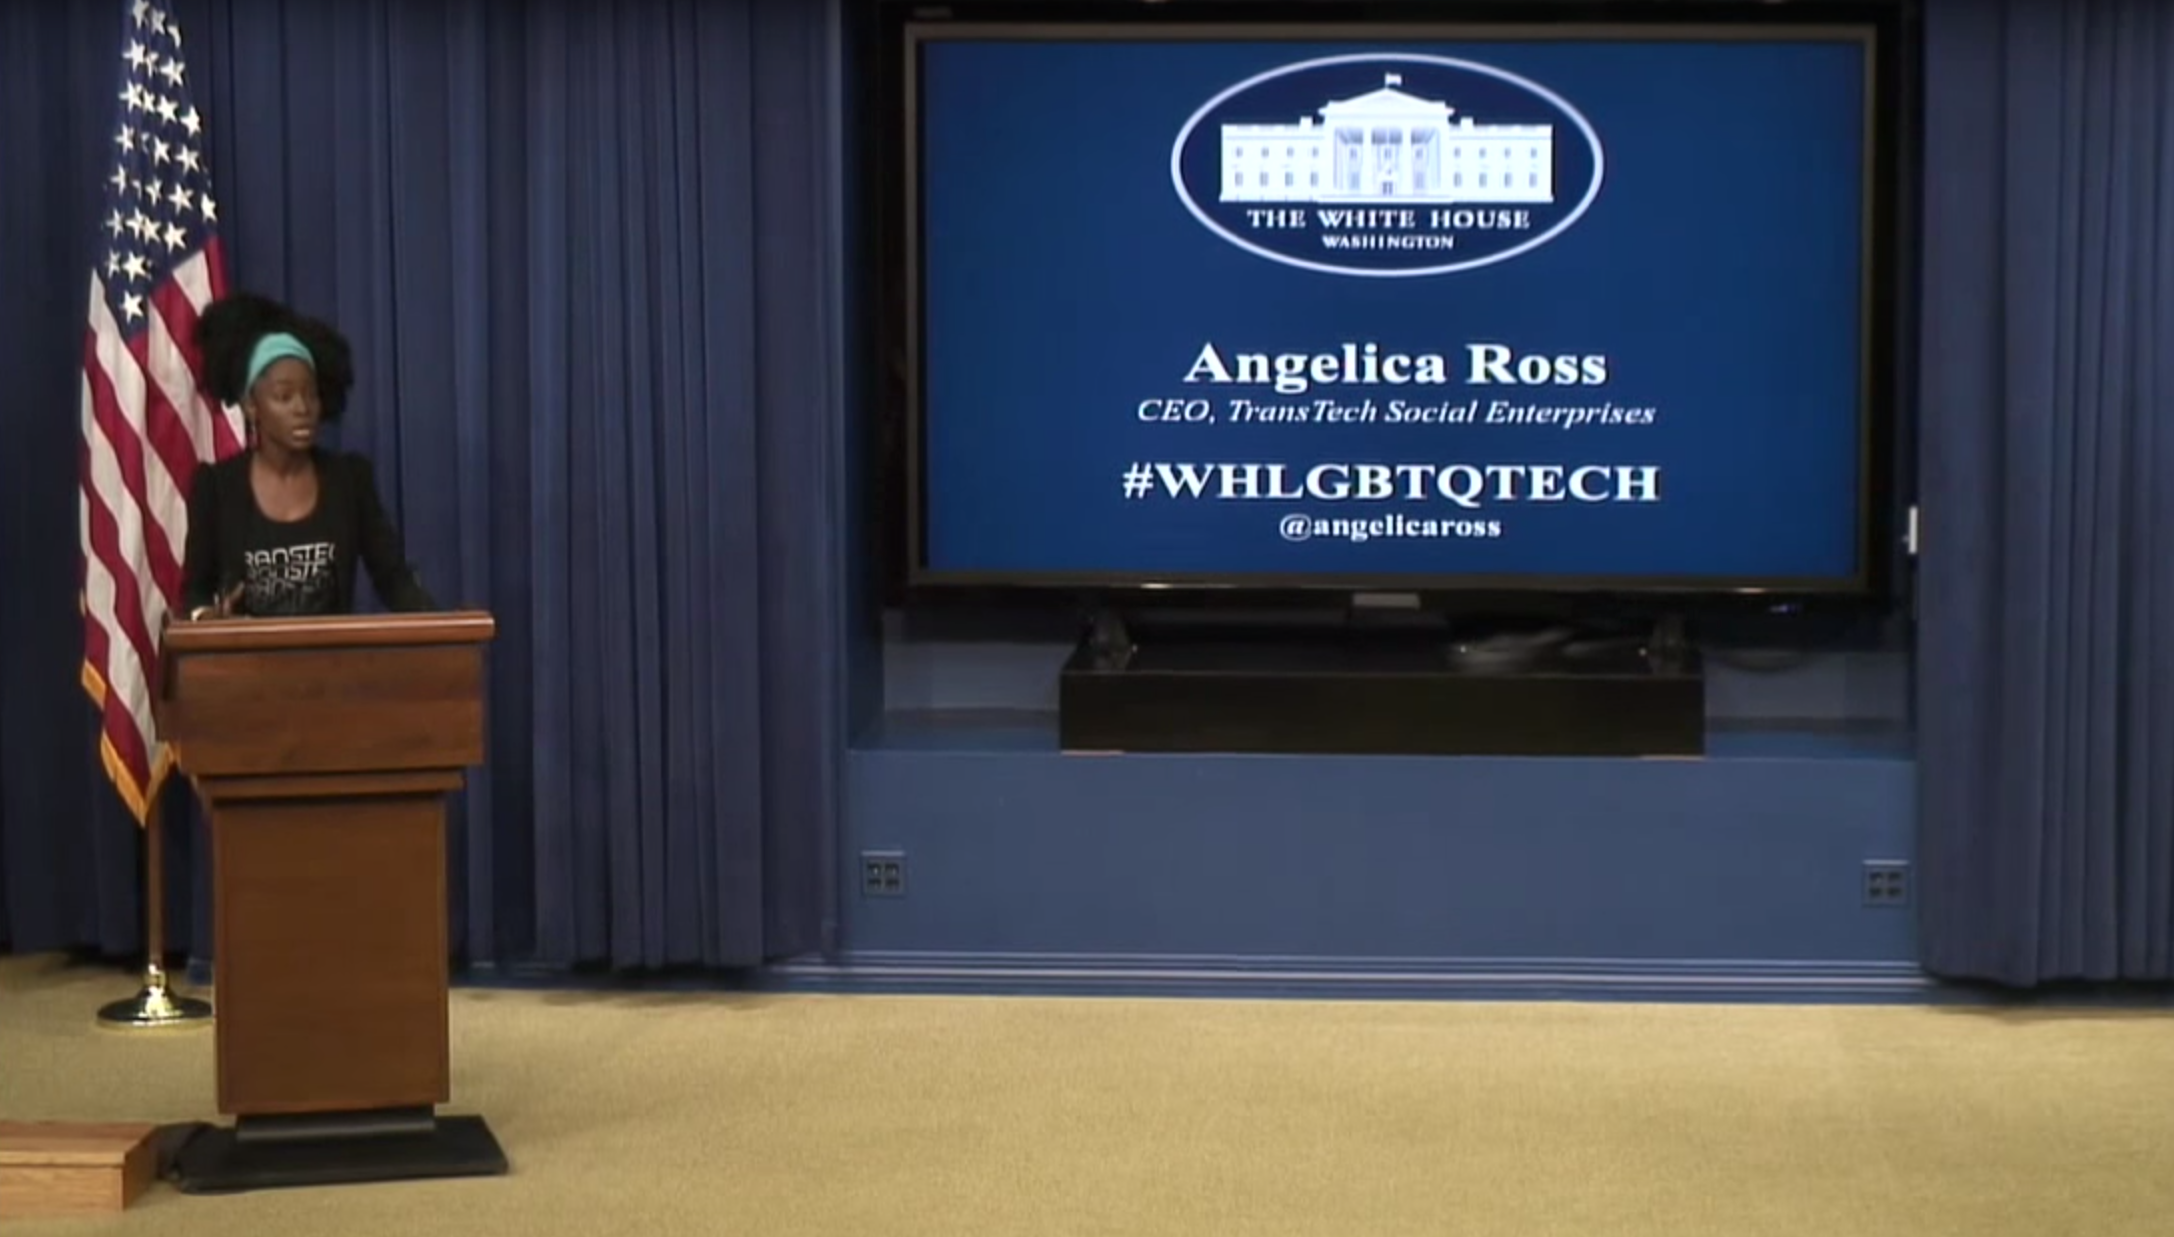 Angelica Ross at the White House LGBTQ Tech and Innovation Summit in August 2015 